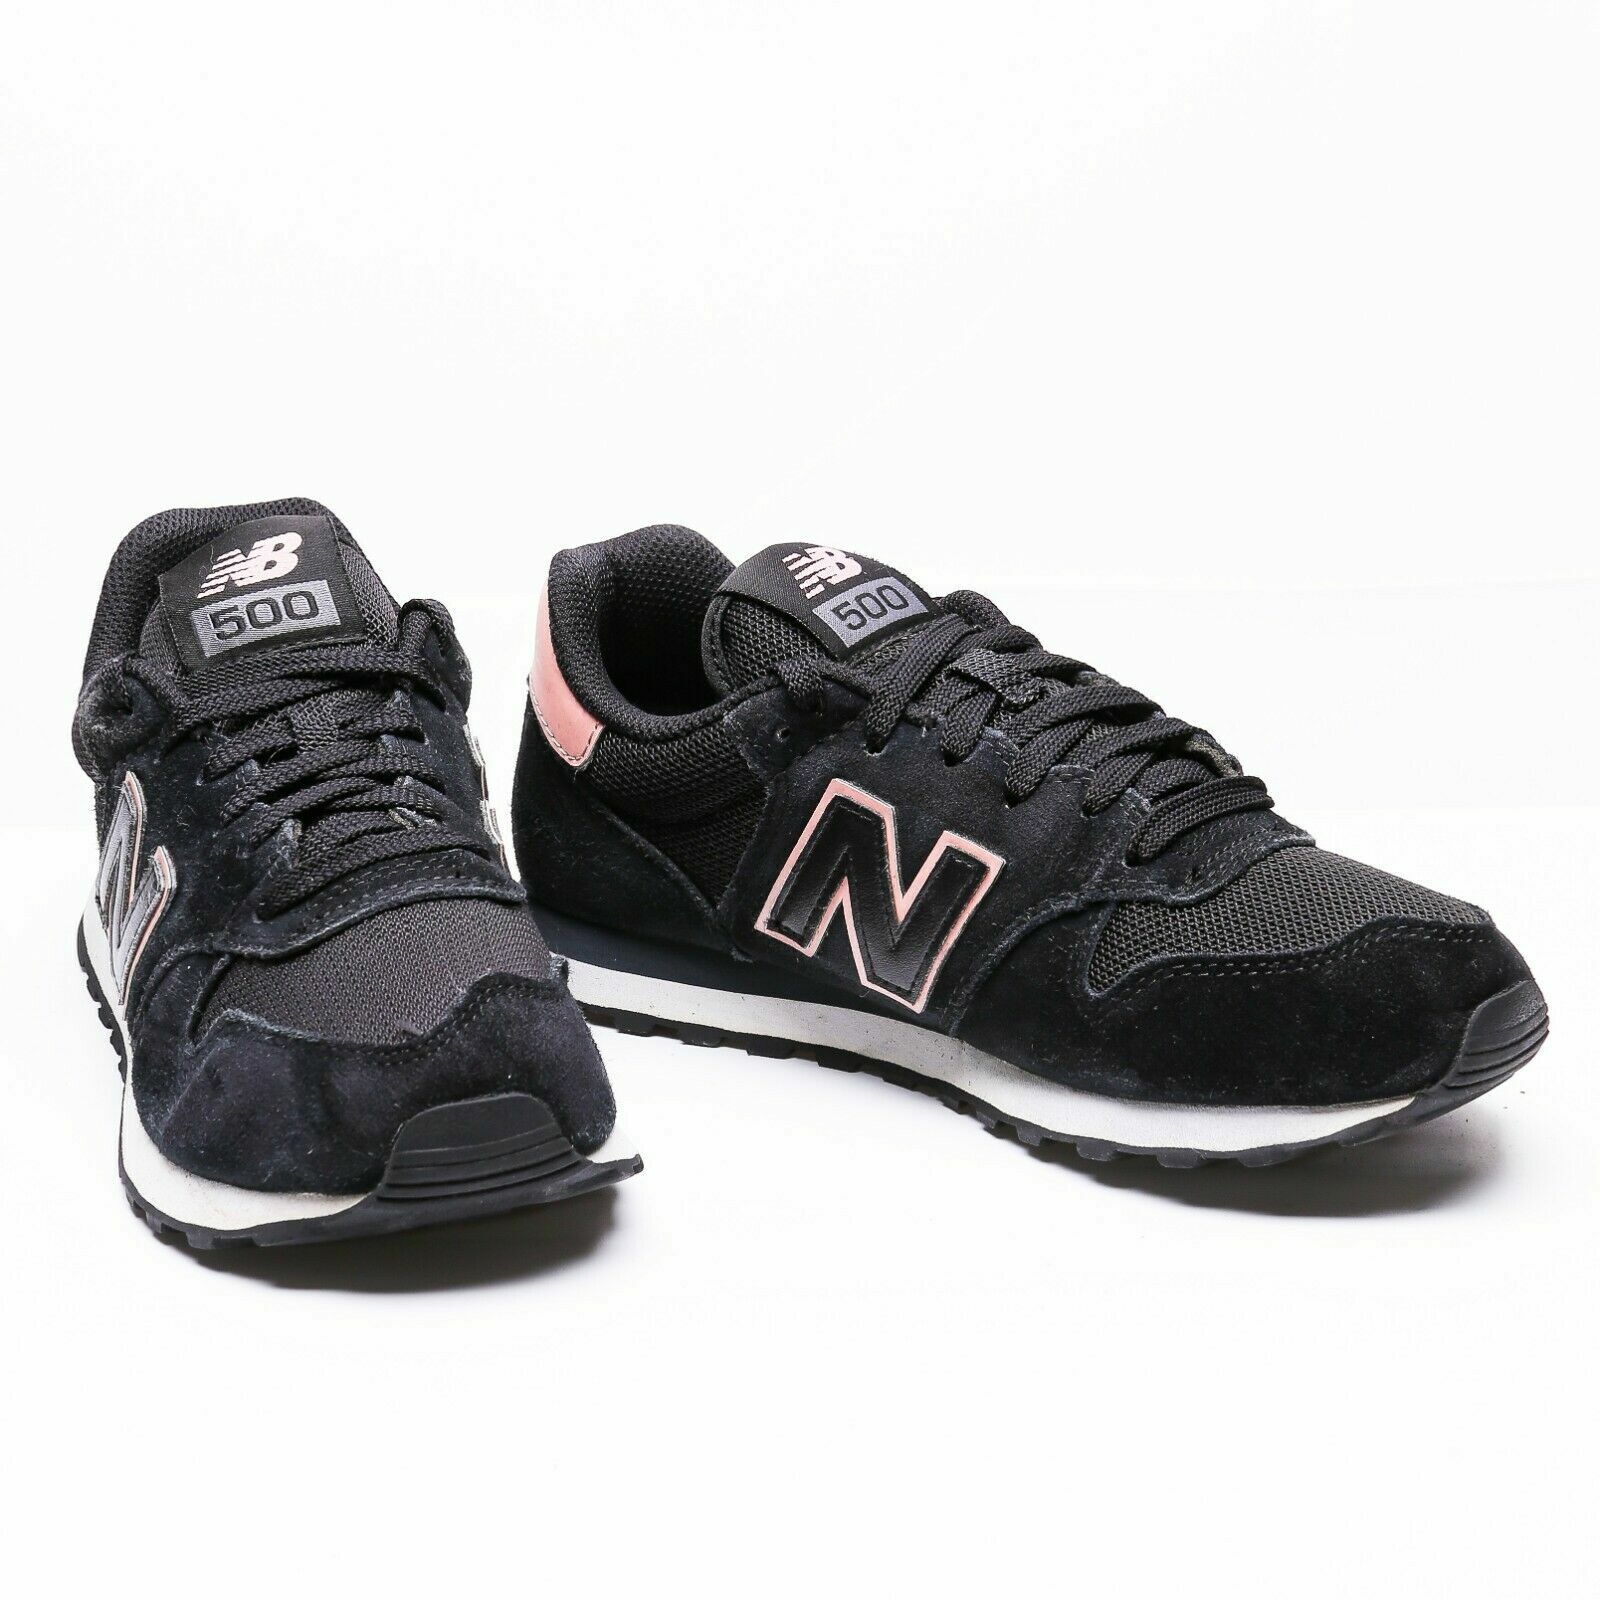 New Balance men's GW500 lace up sneakers